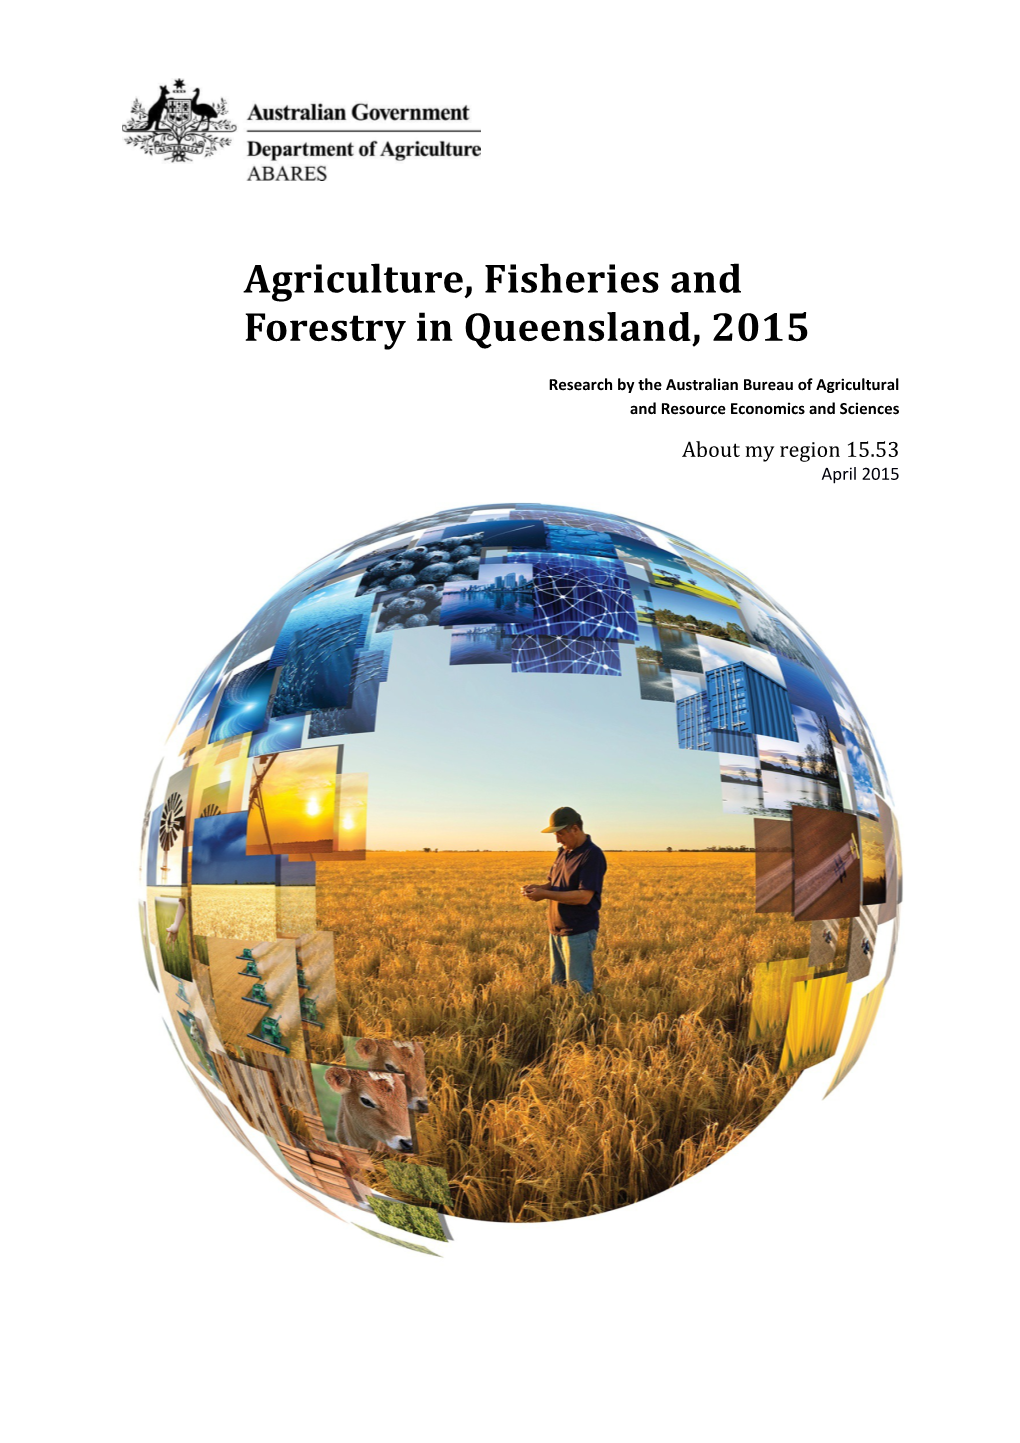 Agriculture, Fisheries and Forestry in Queensland, 2015